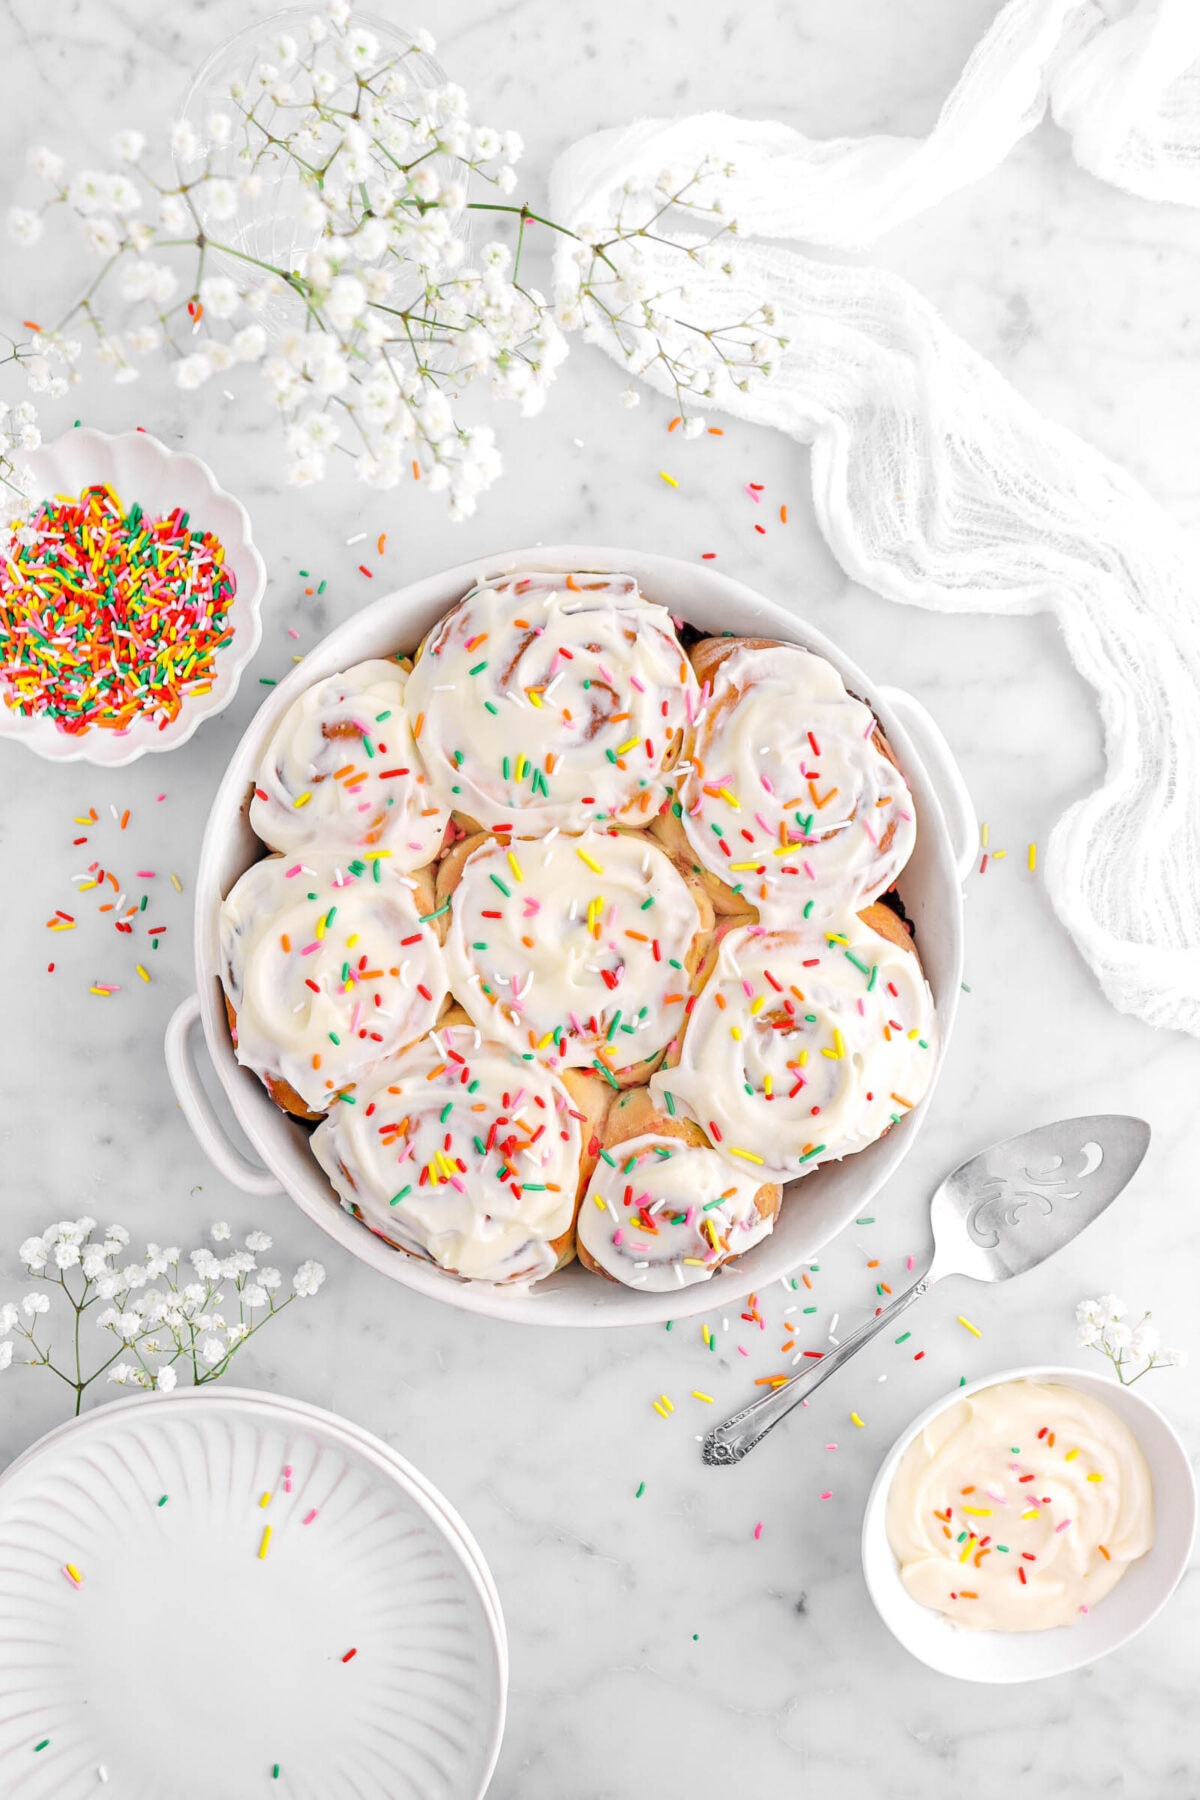 frosted cinnamon rolls with rainbow sprinkles on top in white casserole with a bowl of frosting and a bowl of sprinkles beside, white flowers, stack of plates, and a white cheesecloth around on marble surface.